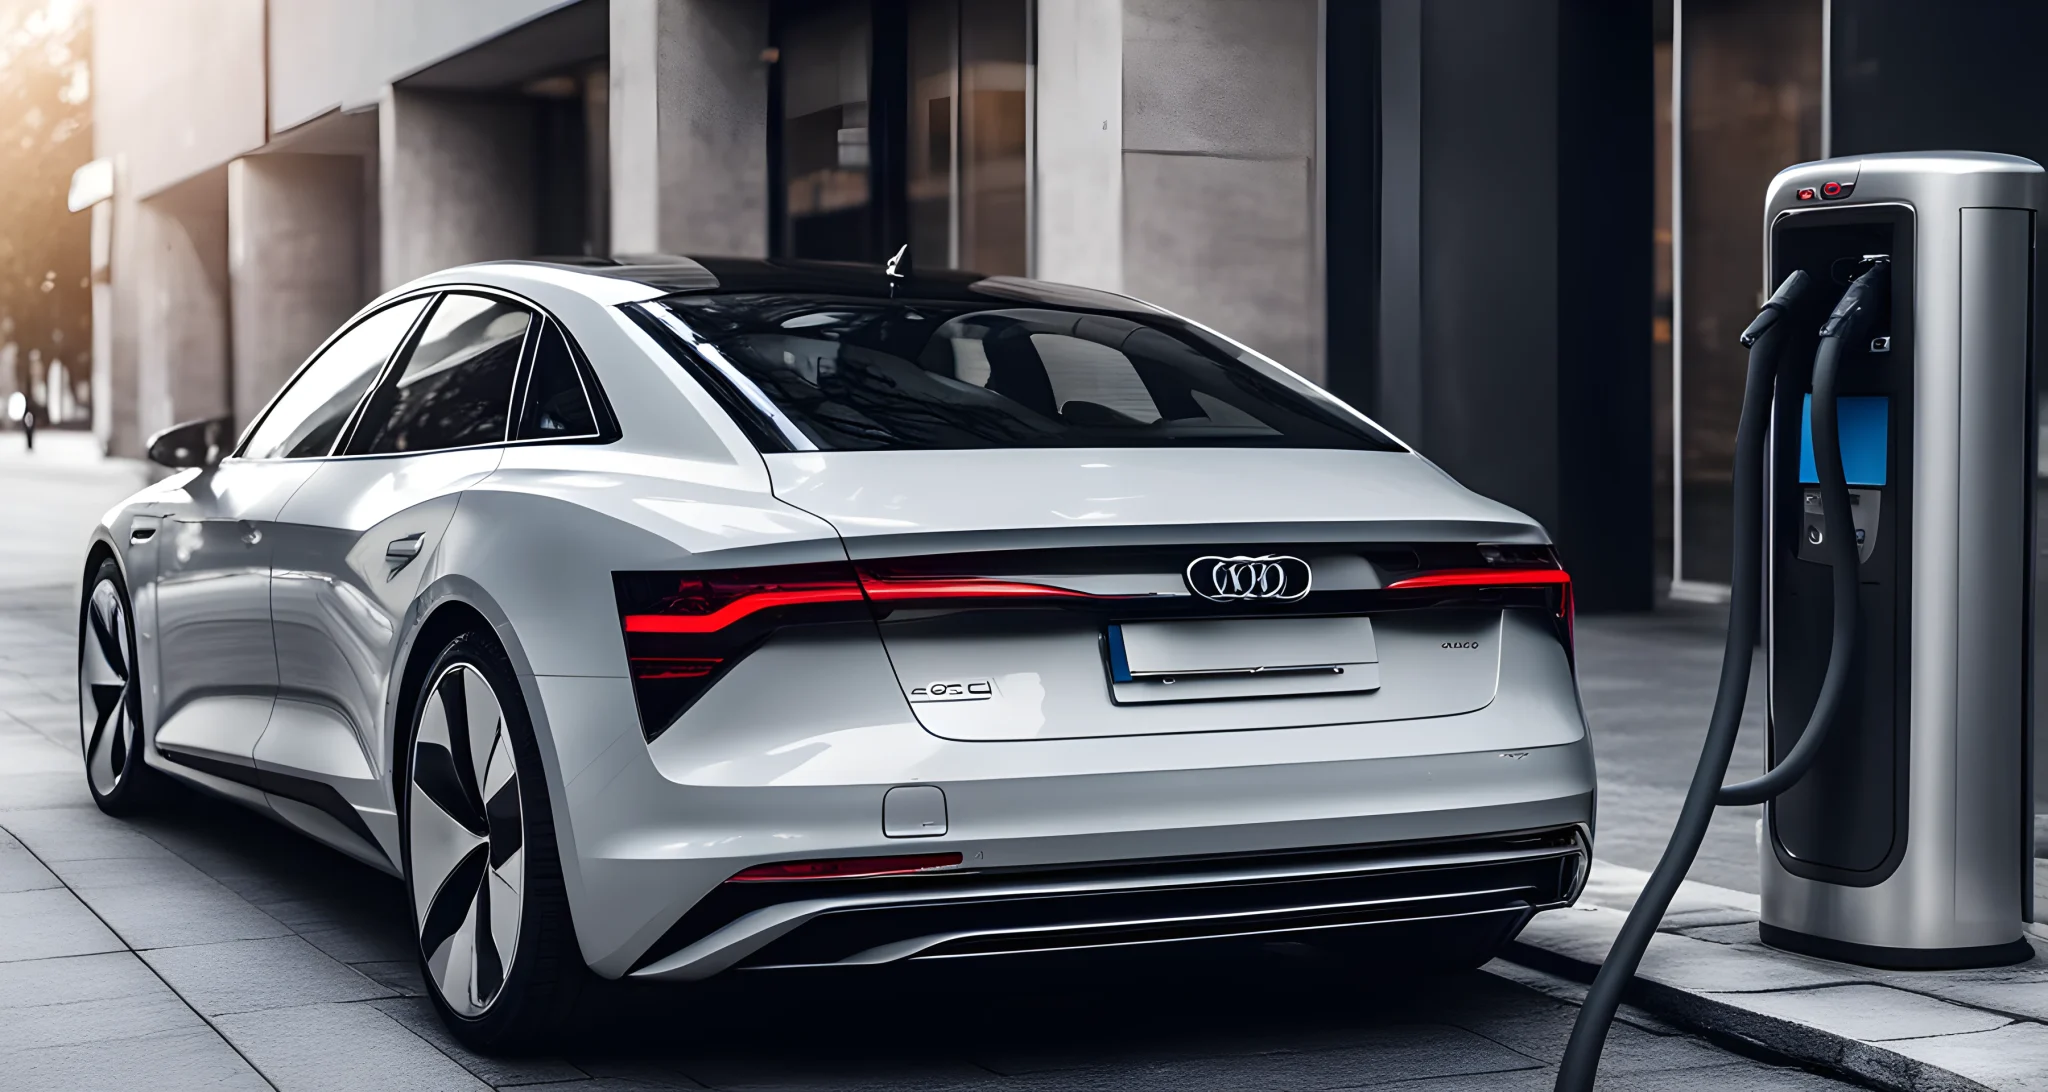 The image shows a sleek Audi electric car parked next to a charging station.